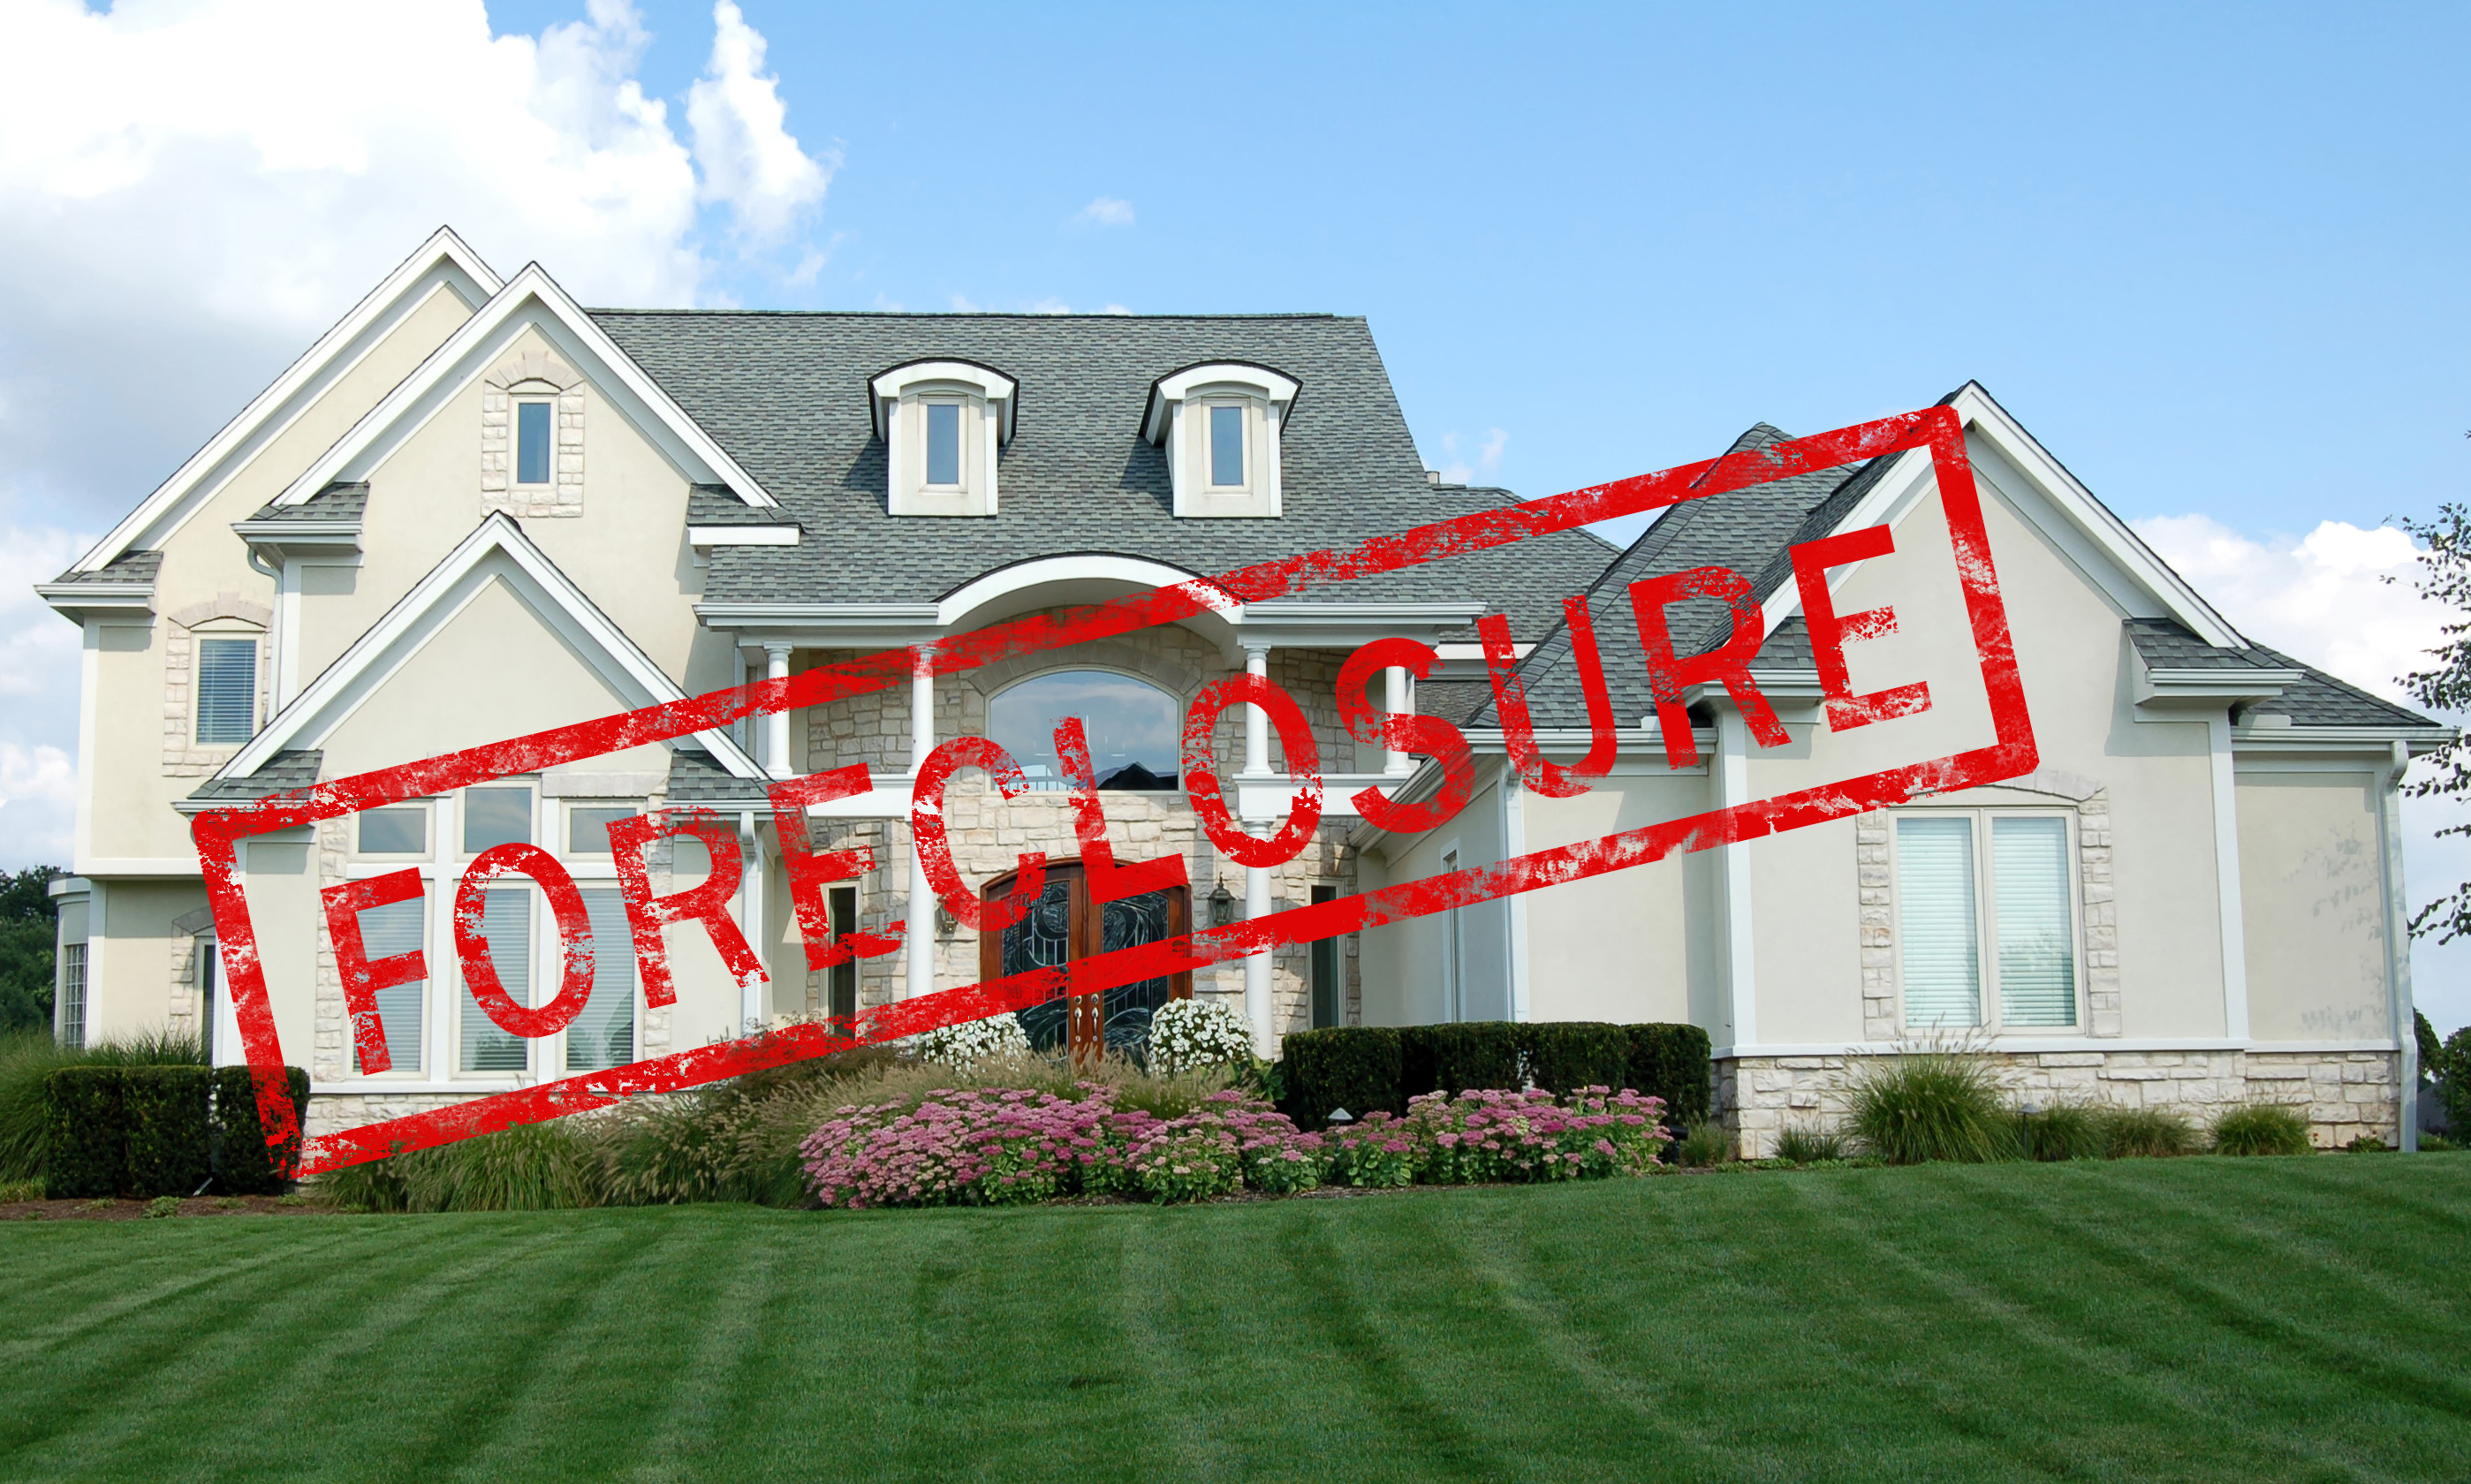 Call Tri-County Appraisal Group, Inc. when you need appraisals of Wayne foreclosures